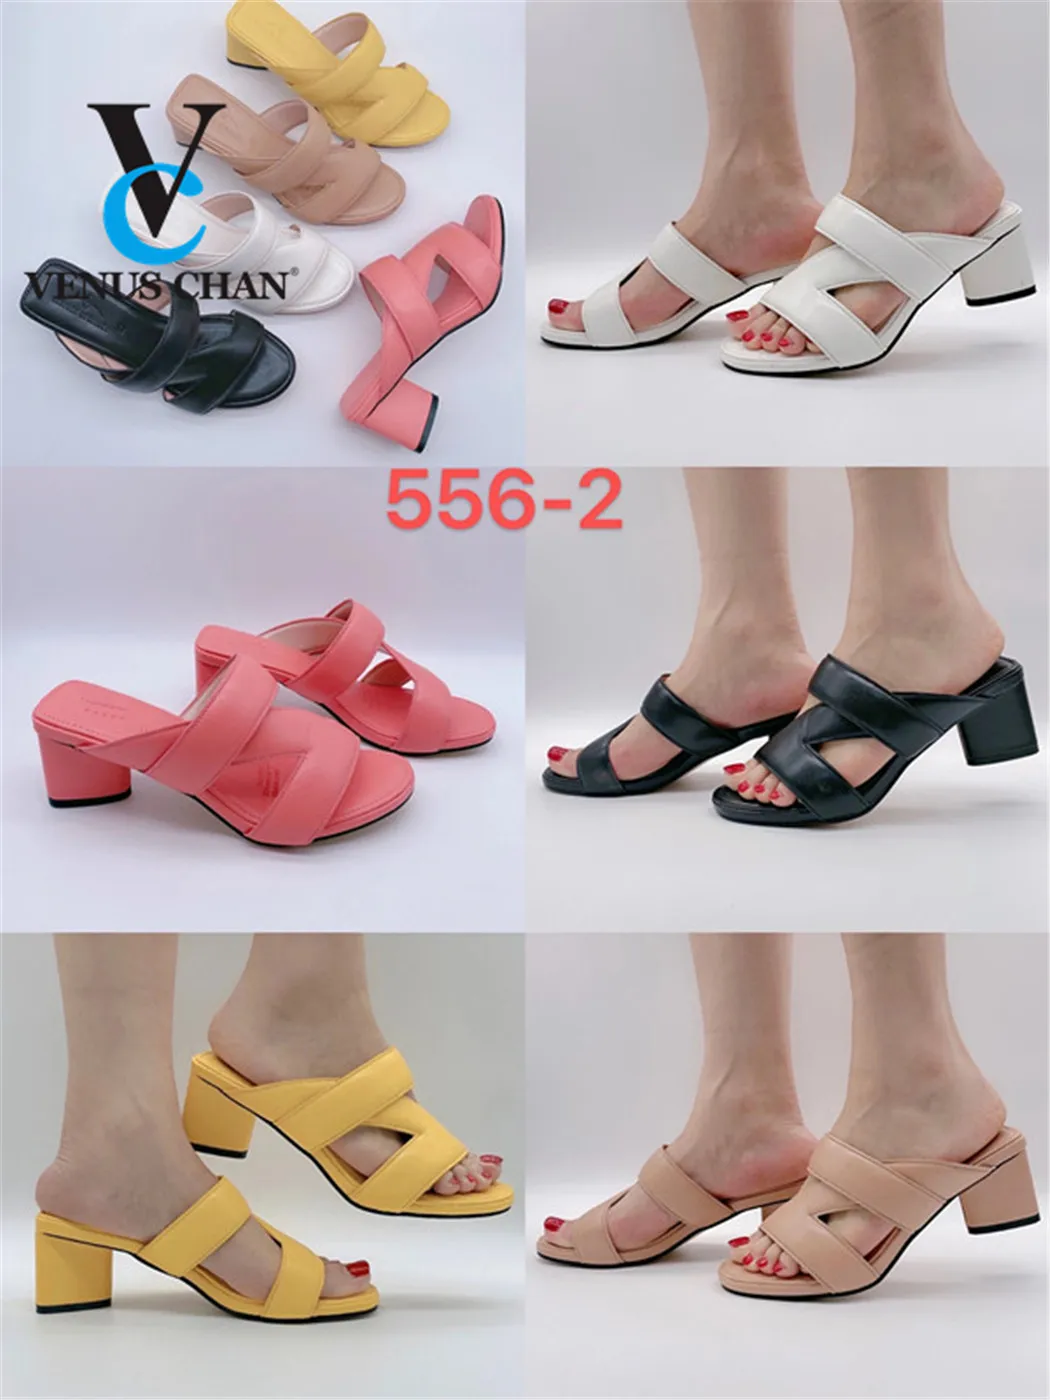 

2021 NEW PU Women's Shoes Summer Peep Toe Fashion Flat With Slippers Shallow Korean Style Mixed Colors Outside Checkered